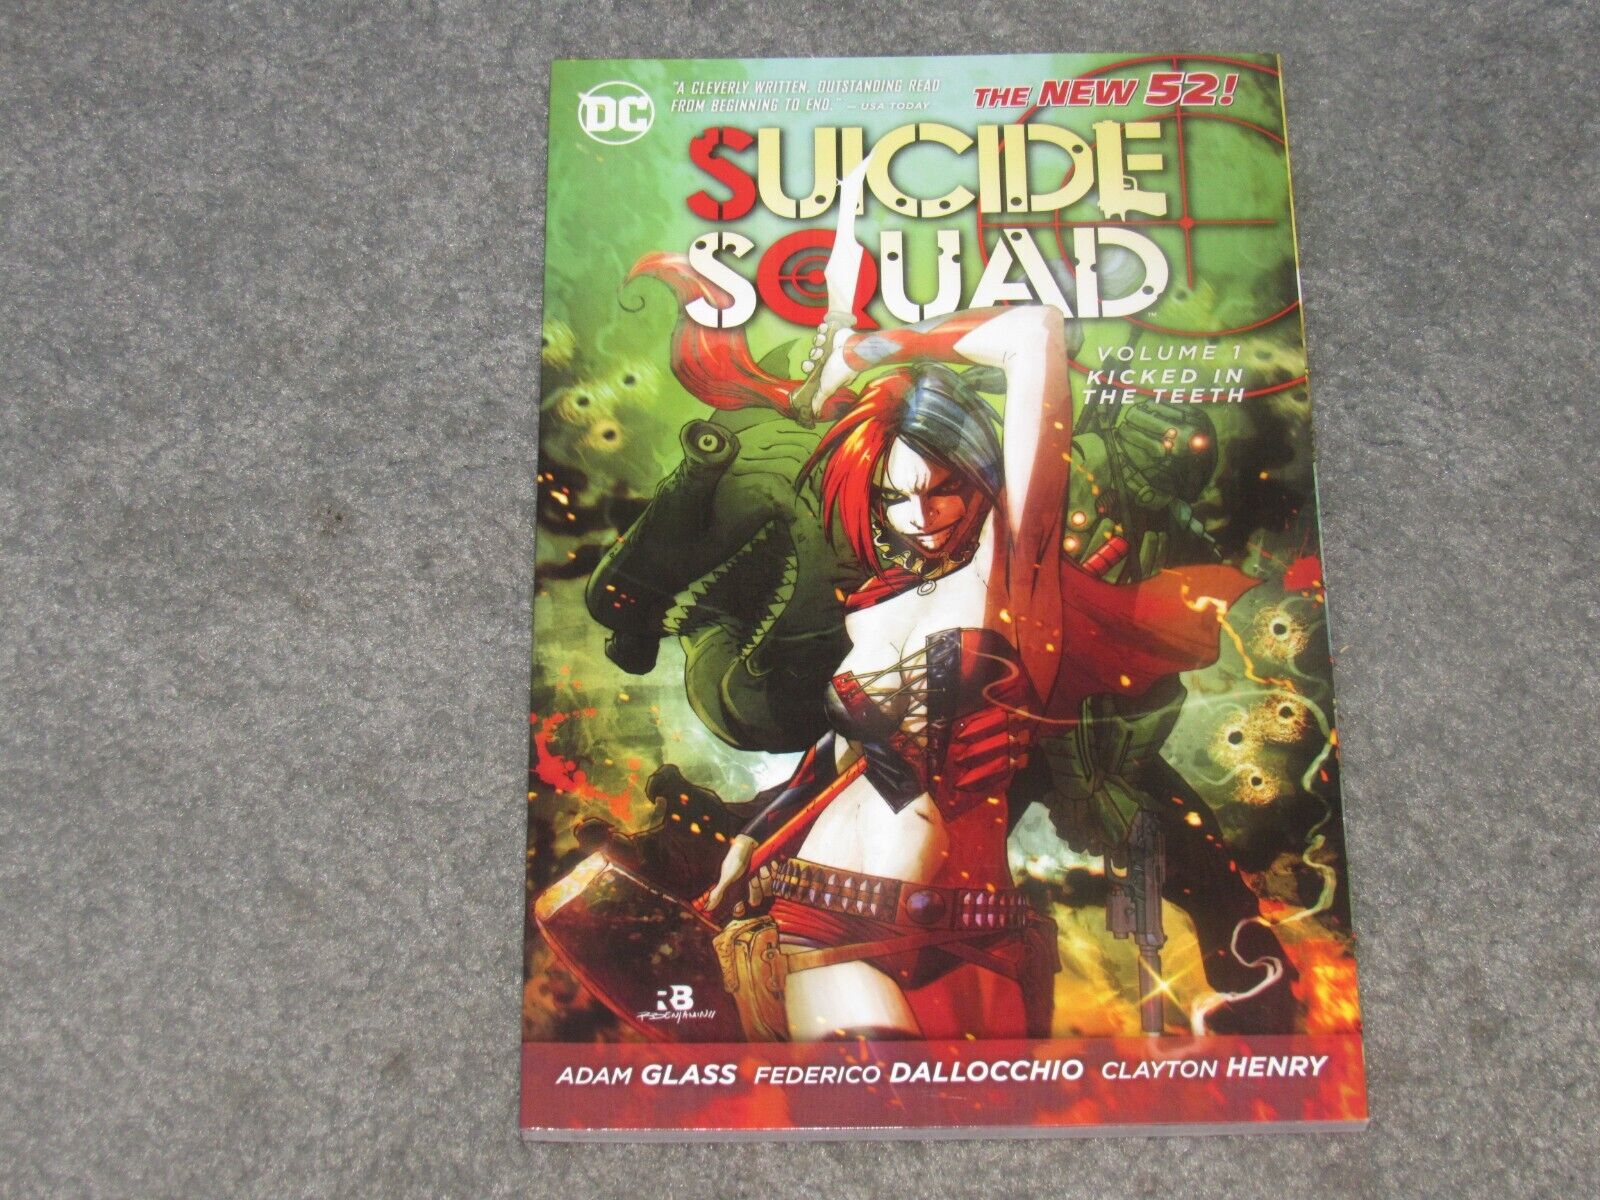 Suicide Squad Vol. 1: Kicked in the Teeth (The New 52) - SC